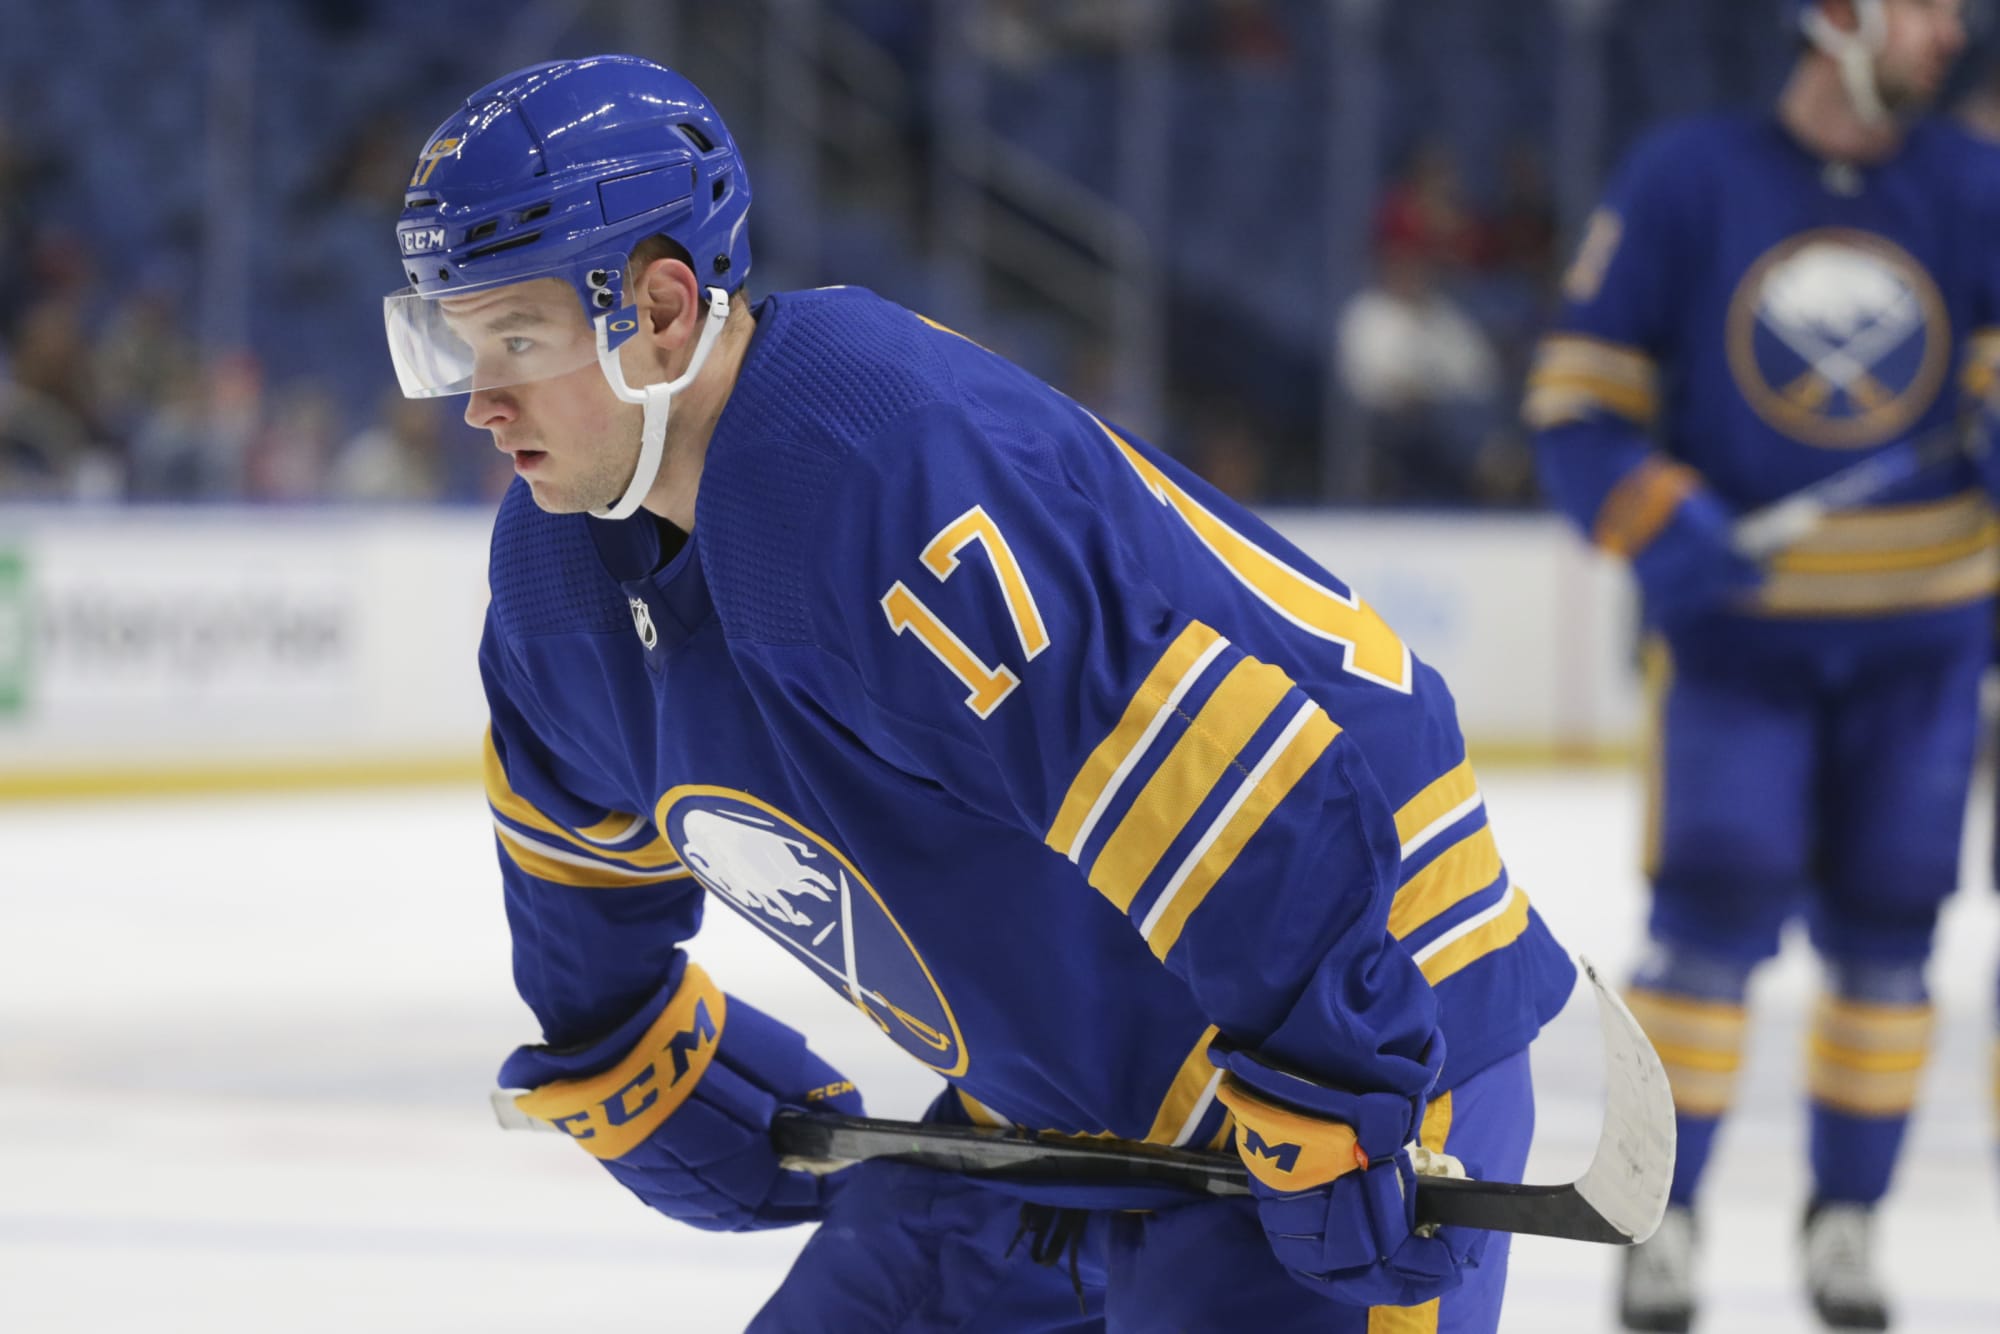 FIVE AMERKS GRADUATES AMONG SABRES OPENING NIGHT ROSTER